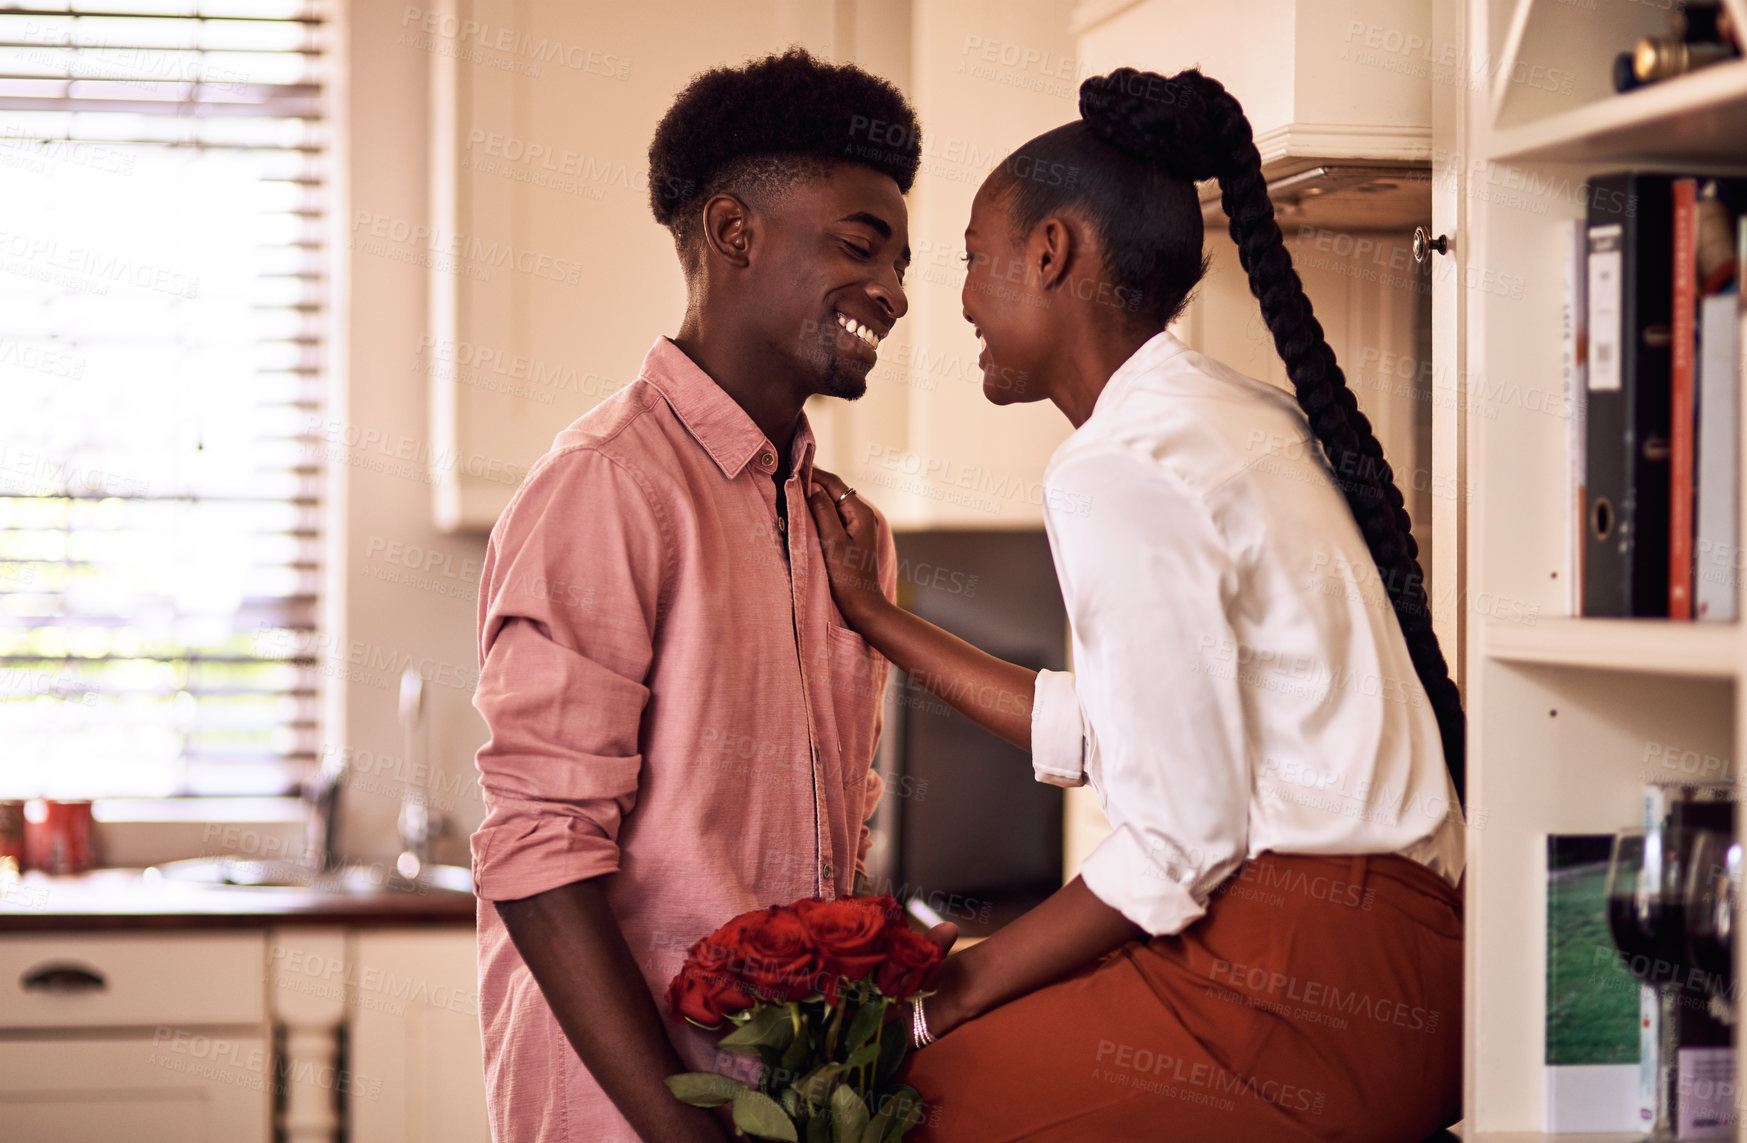 Buy stock photo Cropped shot of an affectionate young man giving his wife a bunch of roses in their kitchen at home